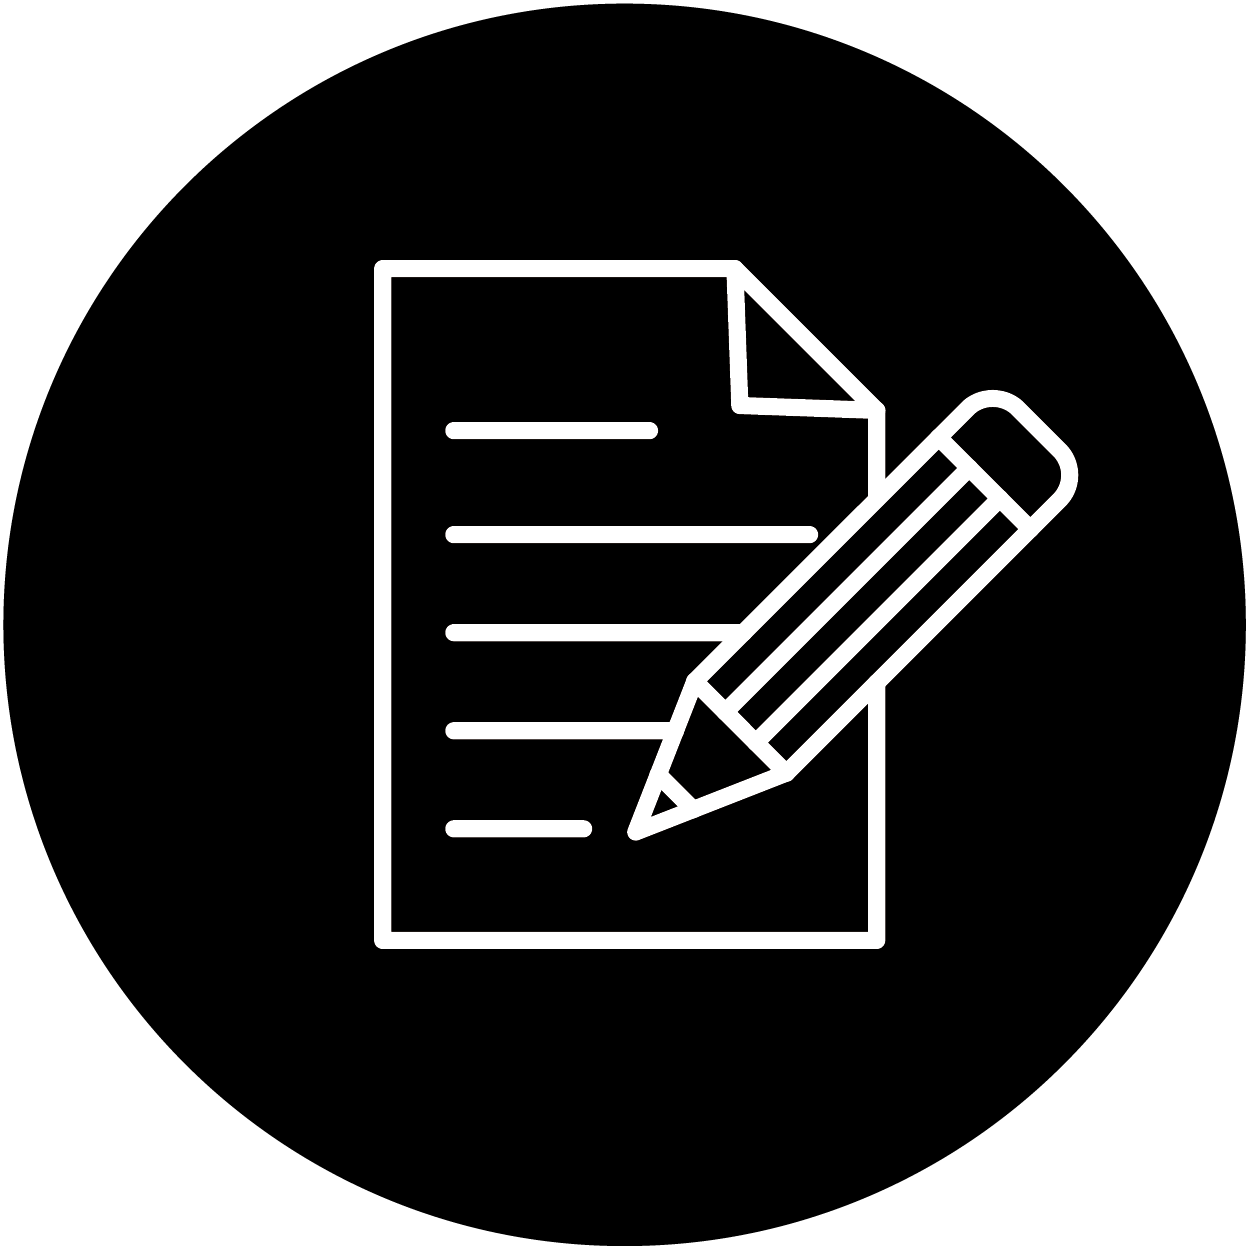 Document and pencil icon